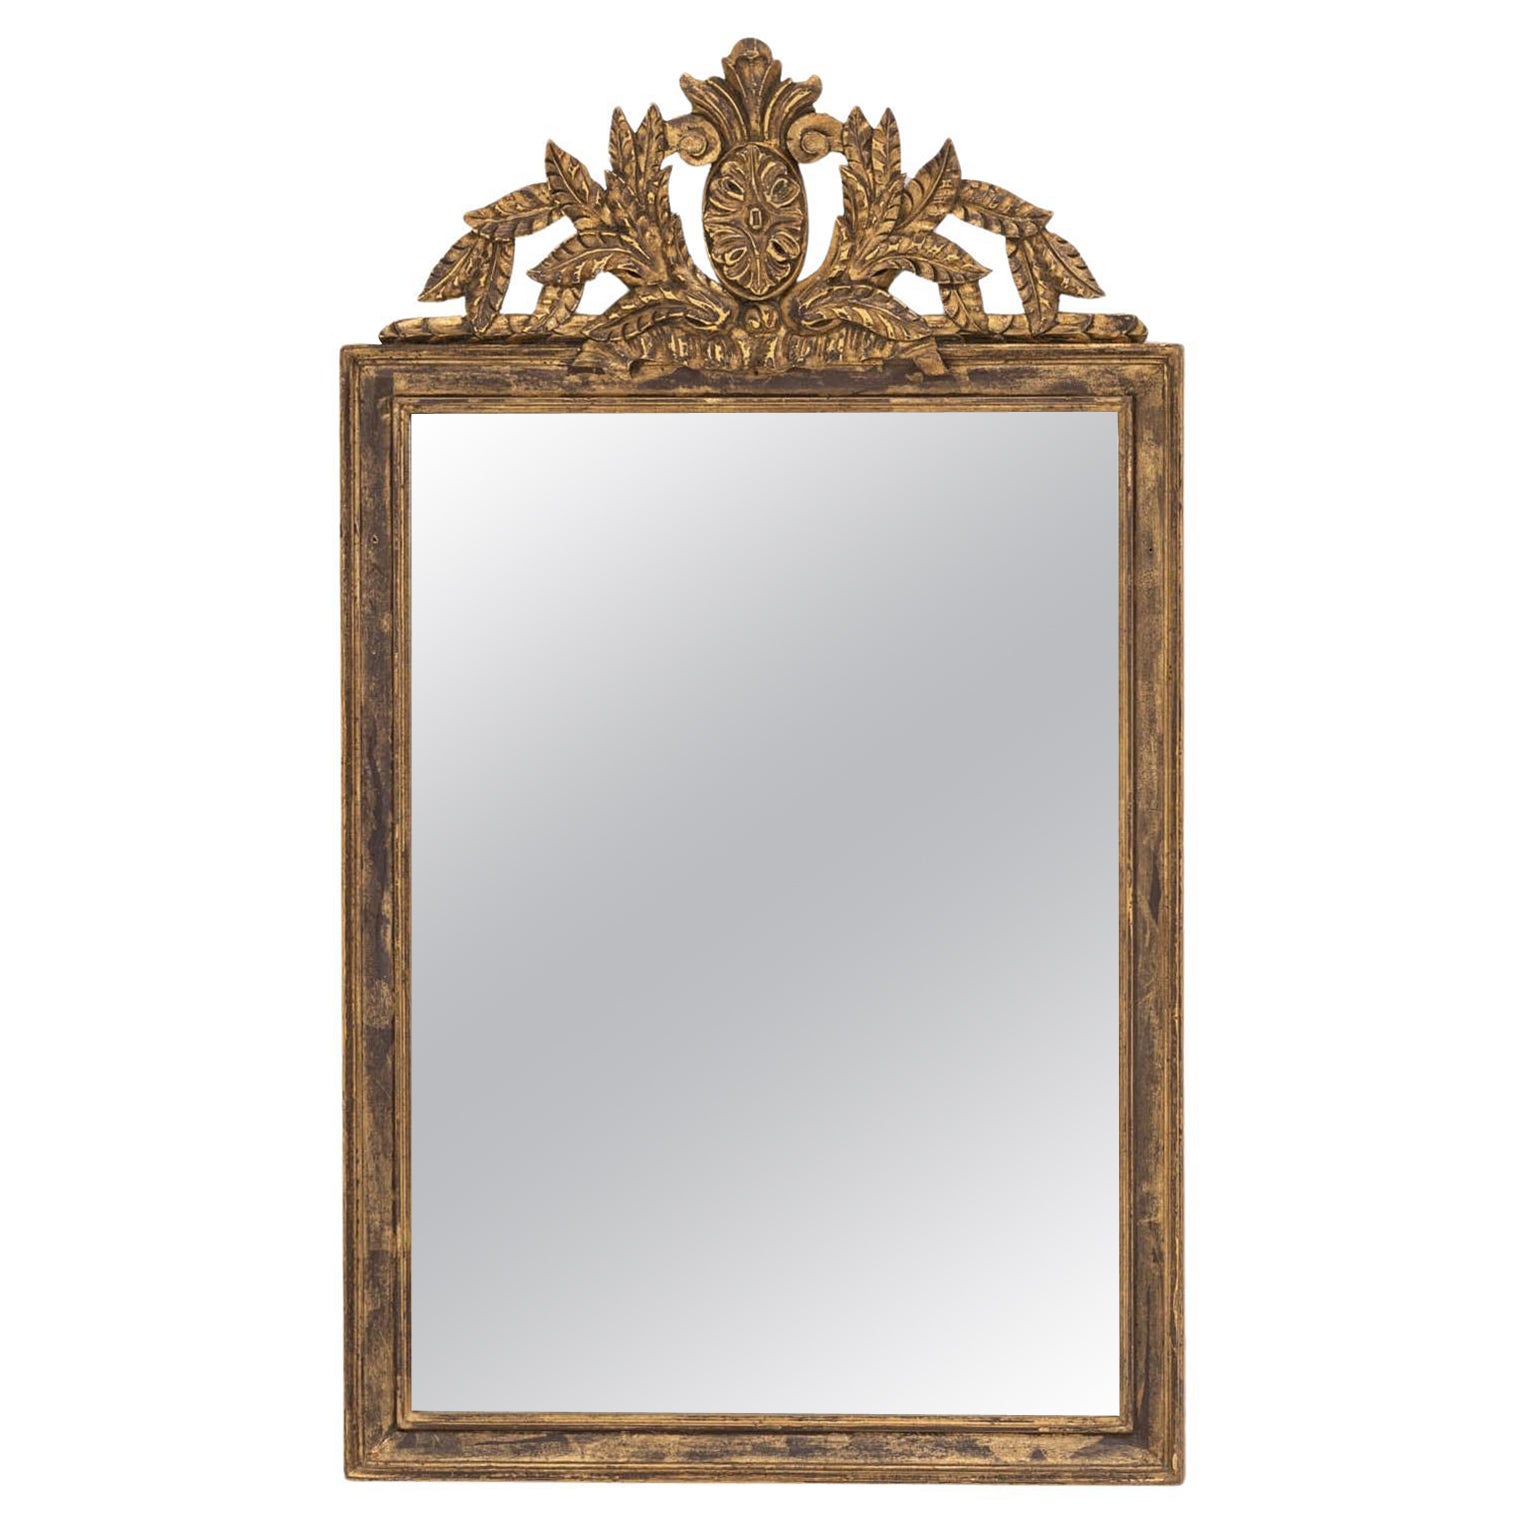 Early 20th Century French Gilded Wood Mirror